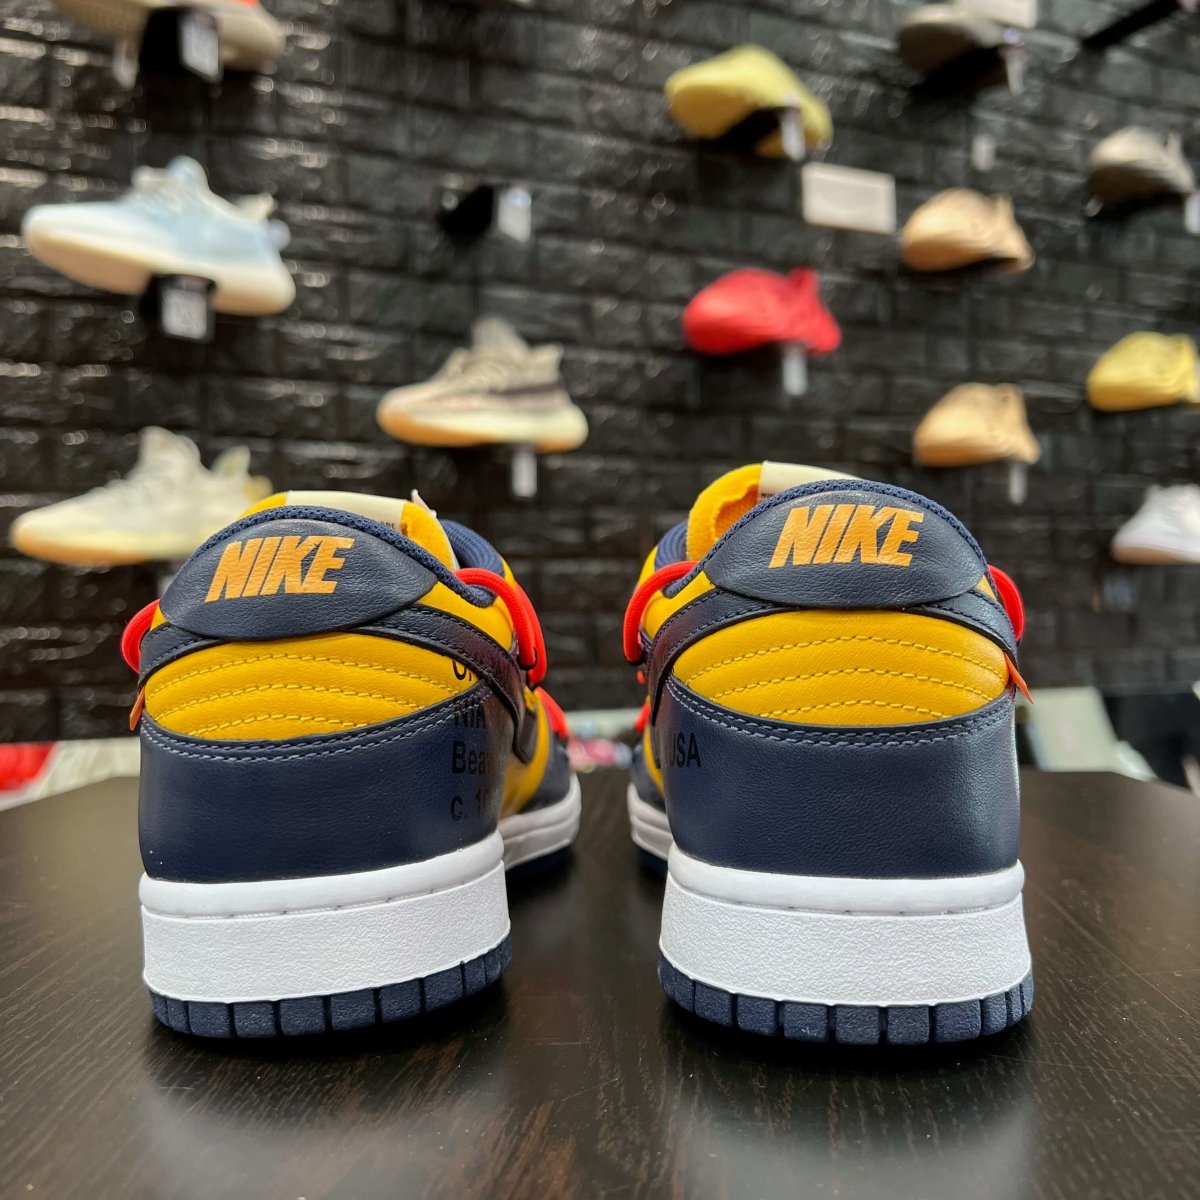 Off-White x Dunk Low 'University Gold' - Gently Enjoyed (Used) Men 10.5 - Low Sneaker - Dunks - Jawns on Fire